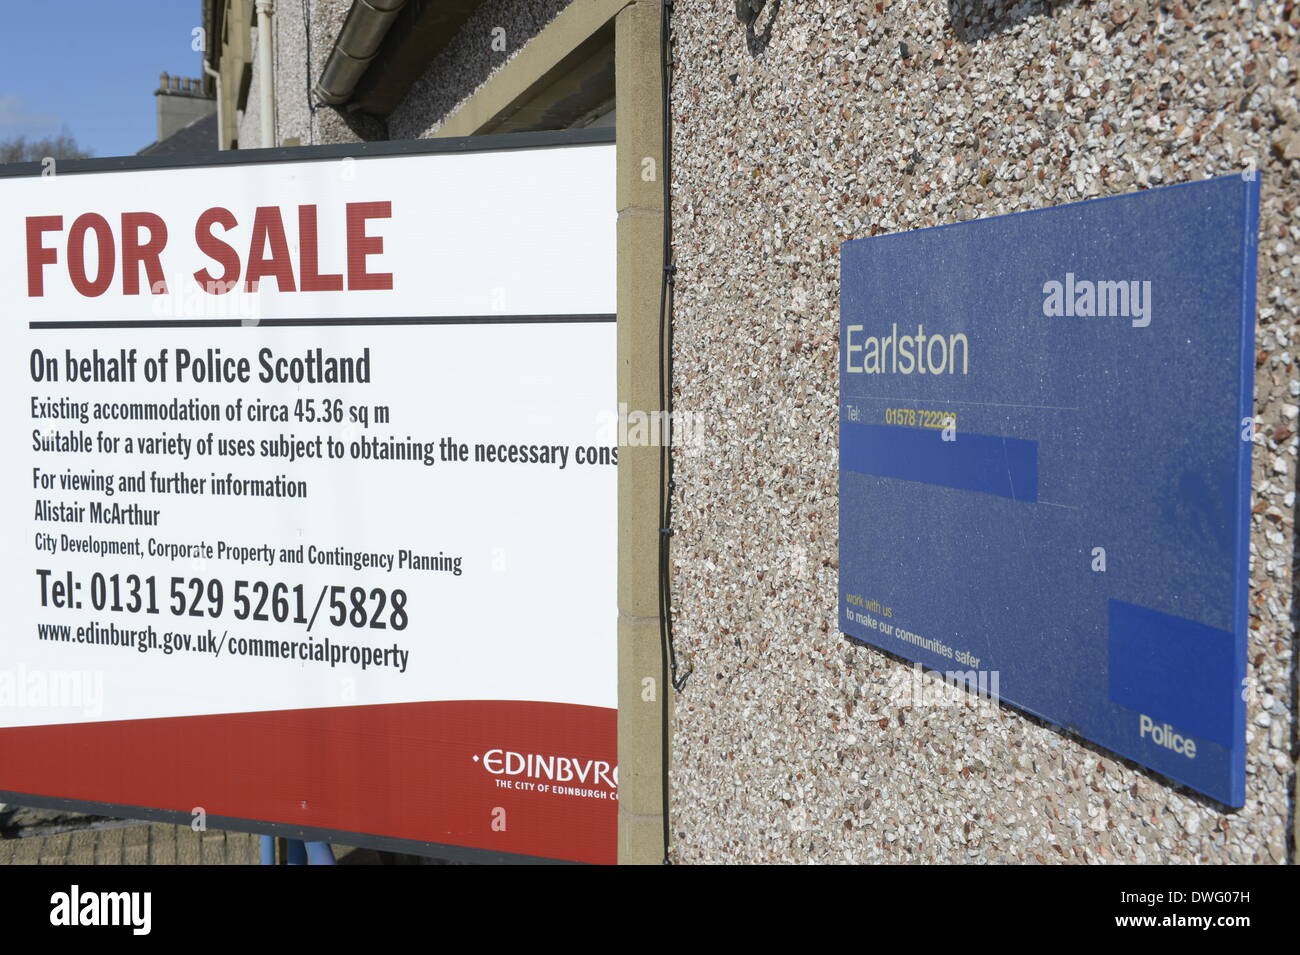 Huntshaw Road, Earlston, UK. 07 Mar 2014. Closed Police offices go on sale Buildings in Earlston goes up for sale on behalf of Police Scotland. Former Police station in Earlston, Scottish Borders. Credit:  Rob Gray/Alamy Live News Stock Photo